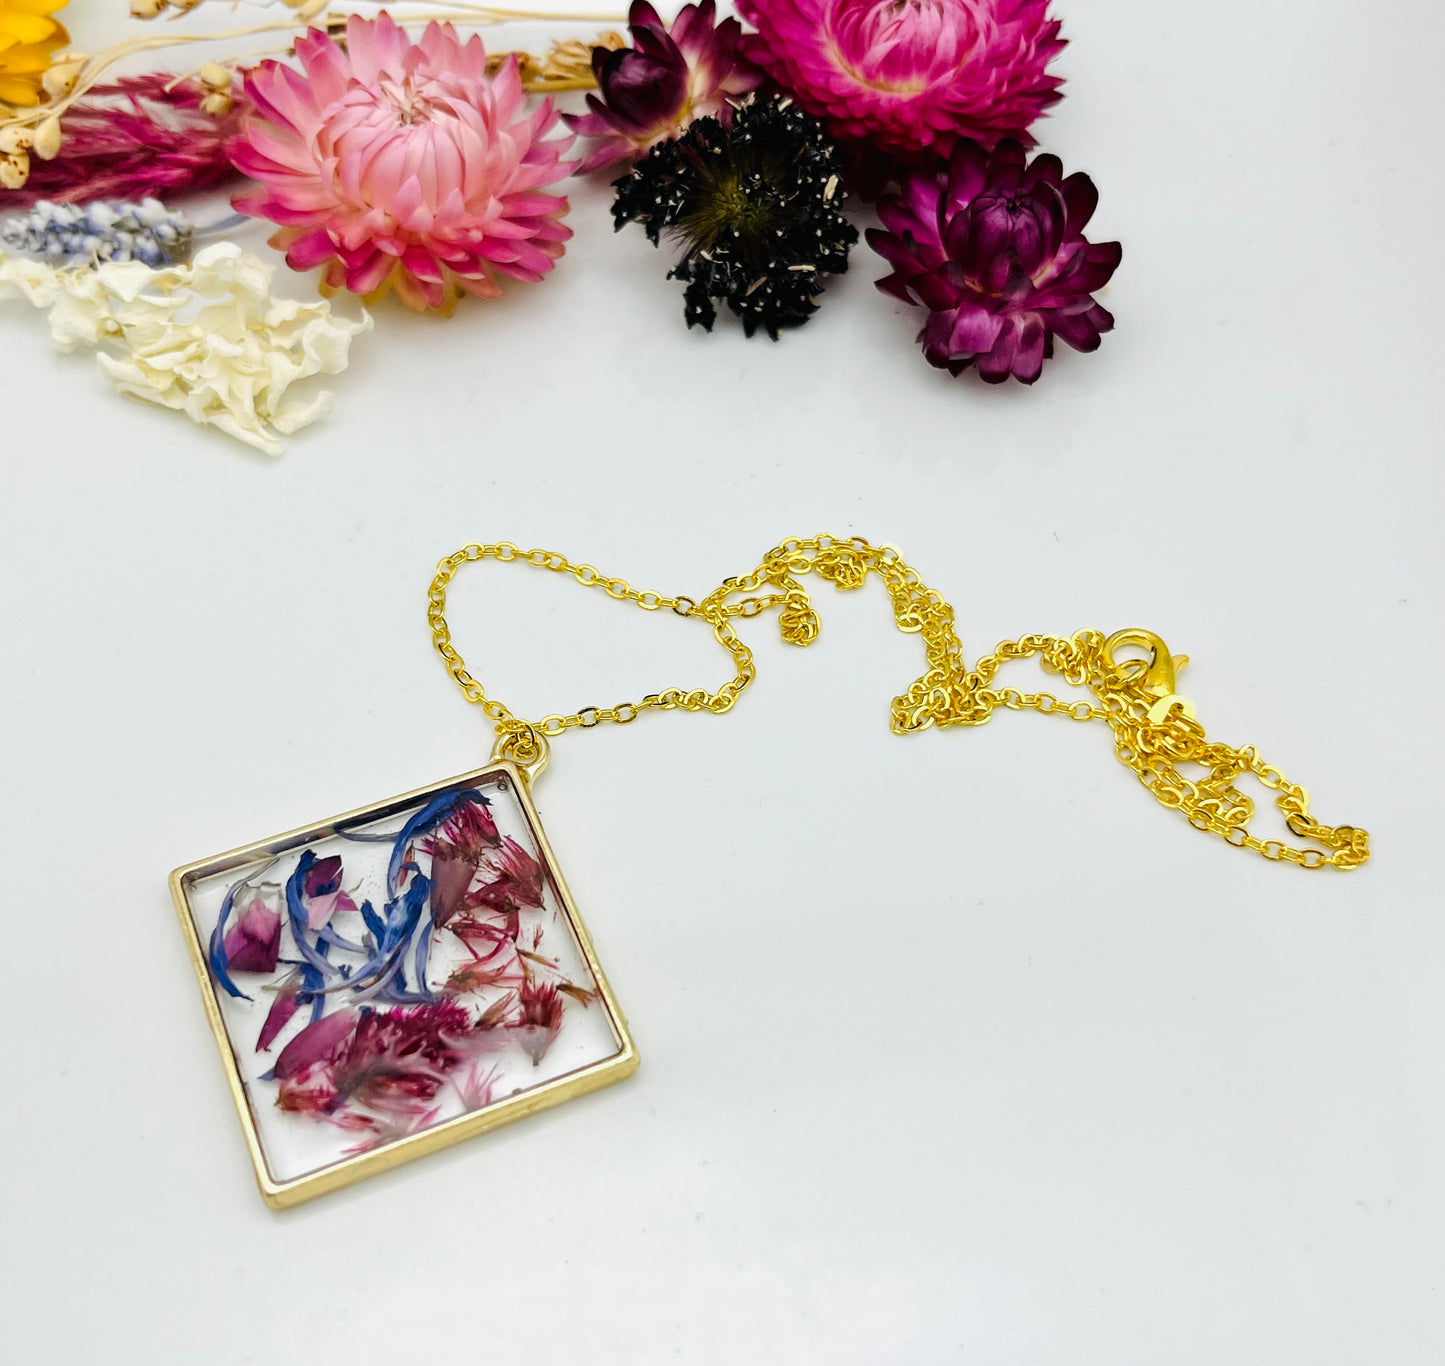 Aster & Celosia Necklace